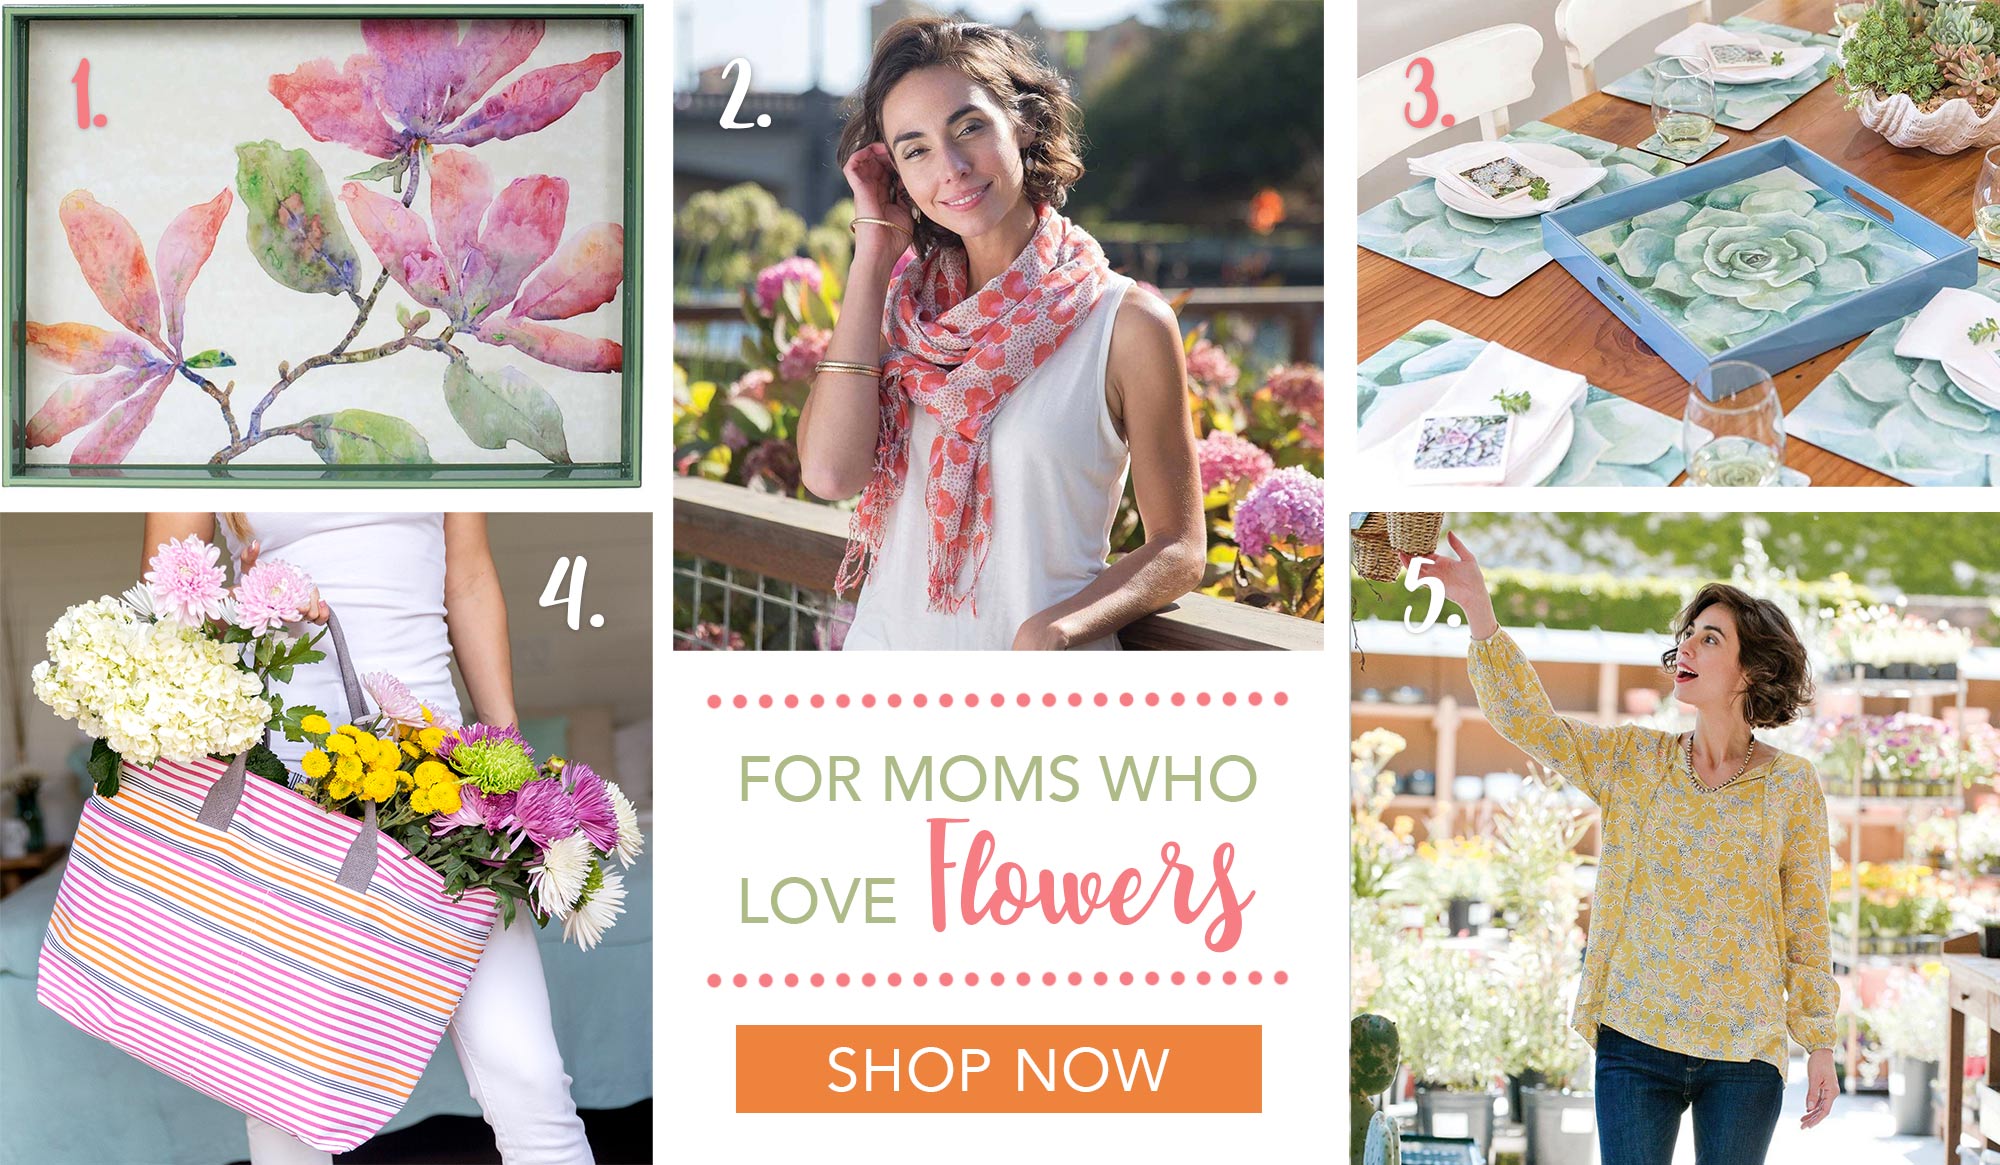 Beautiful gifts for mother's day - floral print scarves and flower art lacquer trays